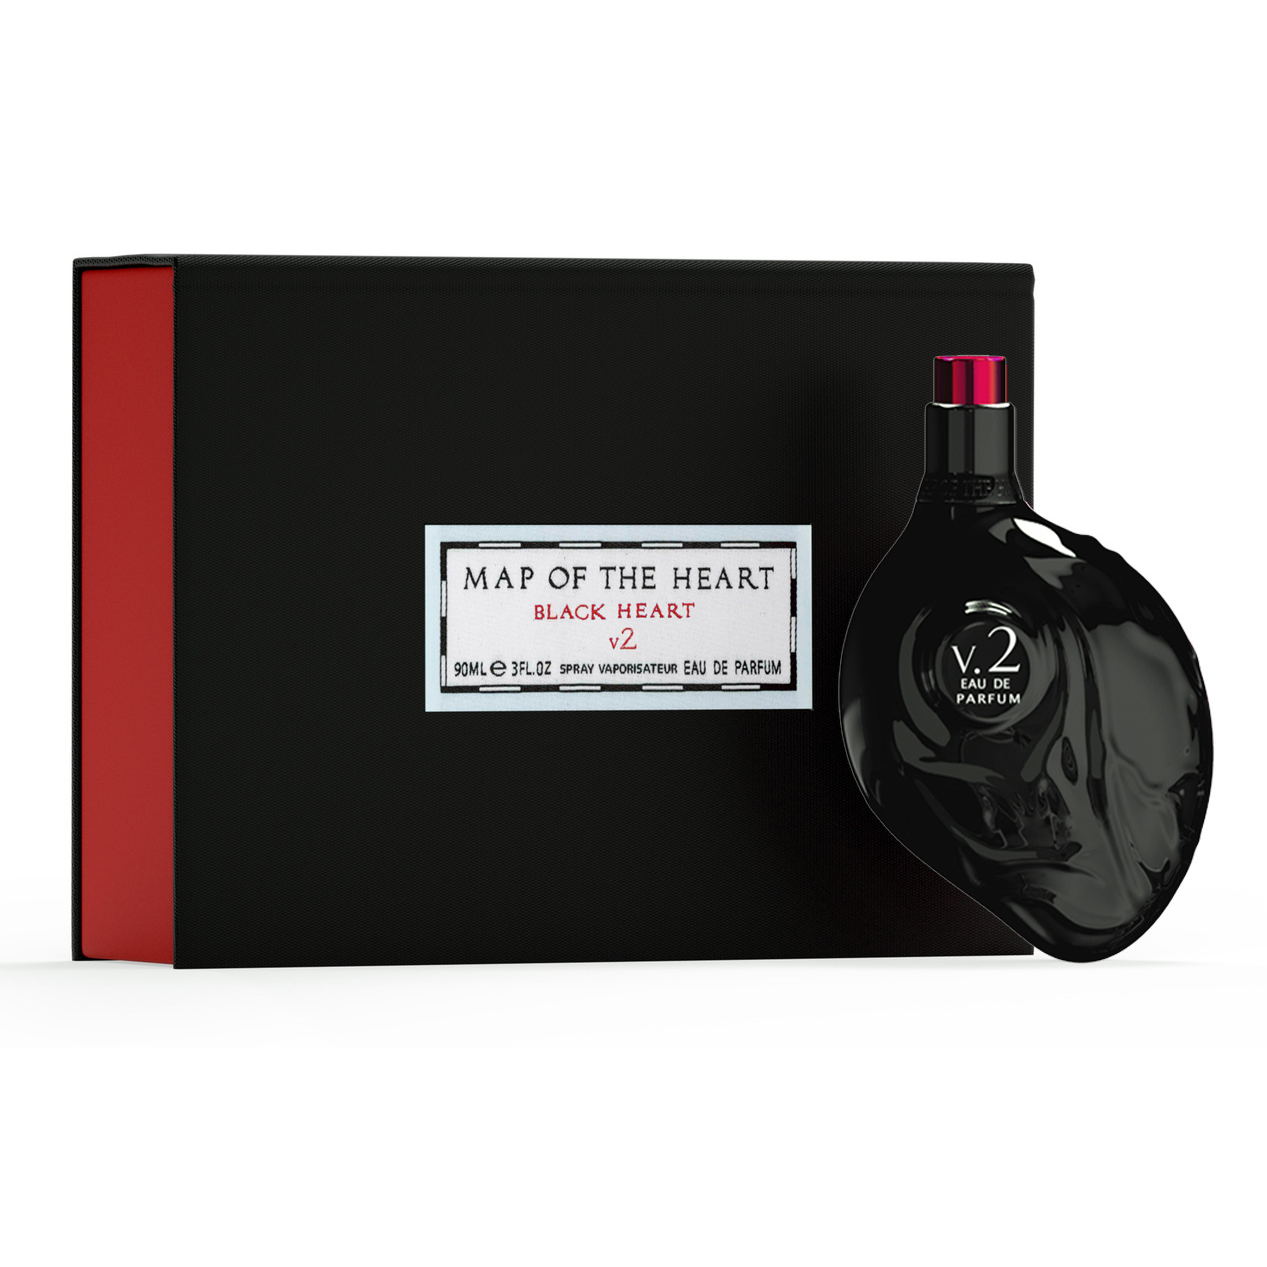 Map of the Heart Black heart perfume v.2 and gift box unisex scent